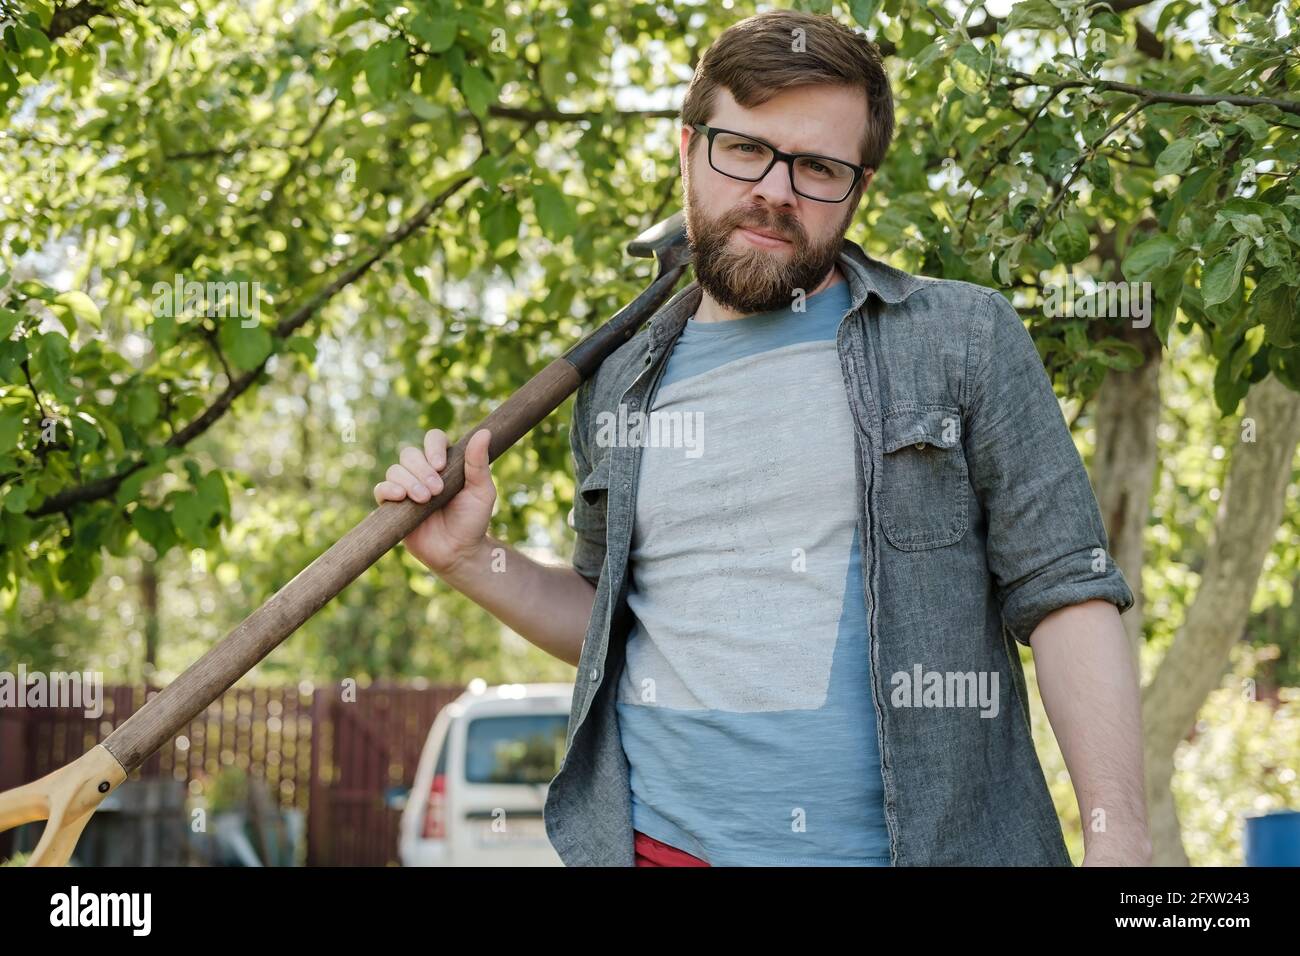 Tired man holds a shovel on his shoulder and looks at the camera, in the garden, against the background of a car and a fence. Stock Photo